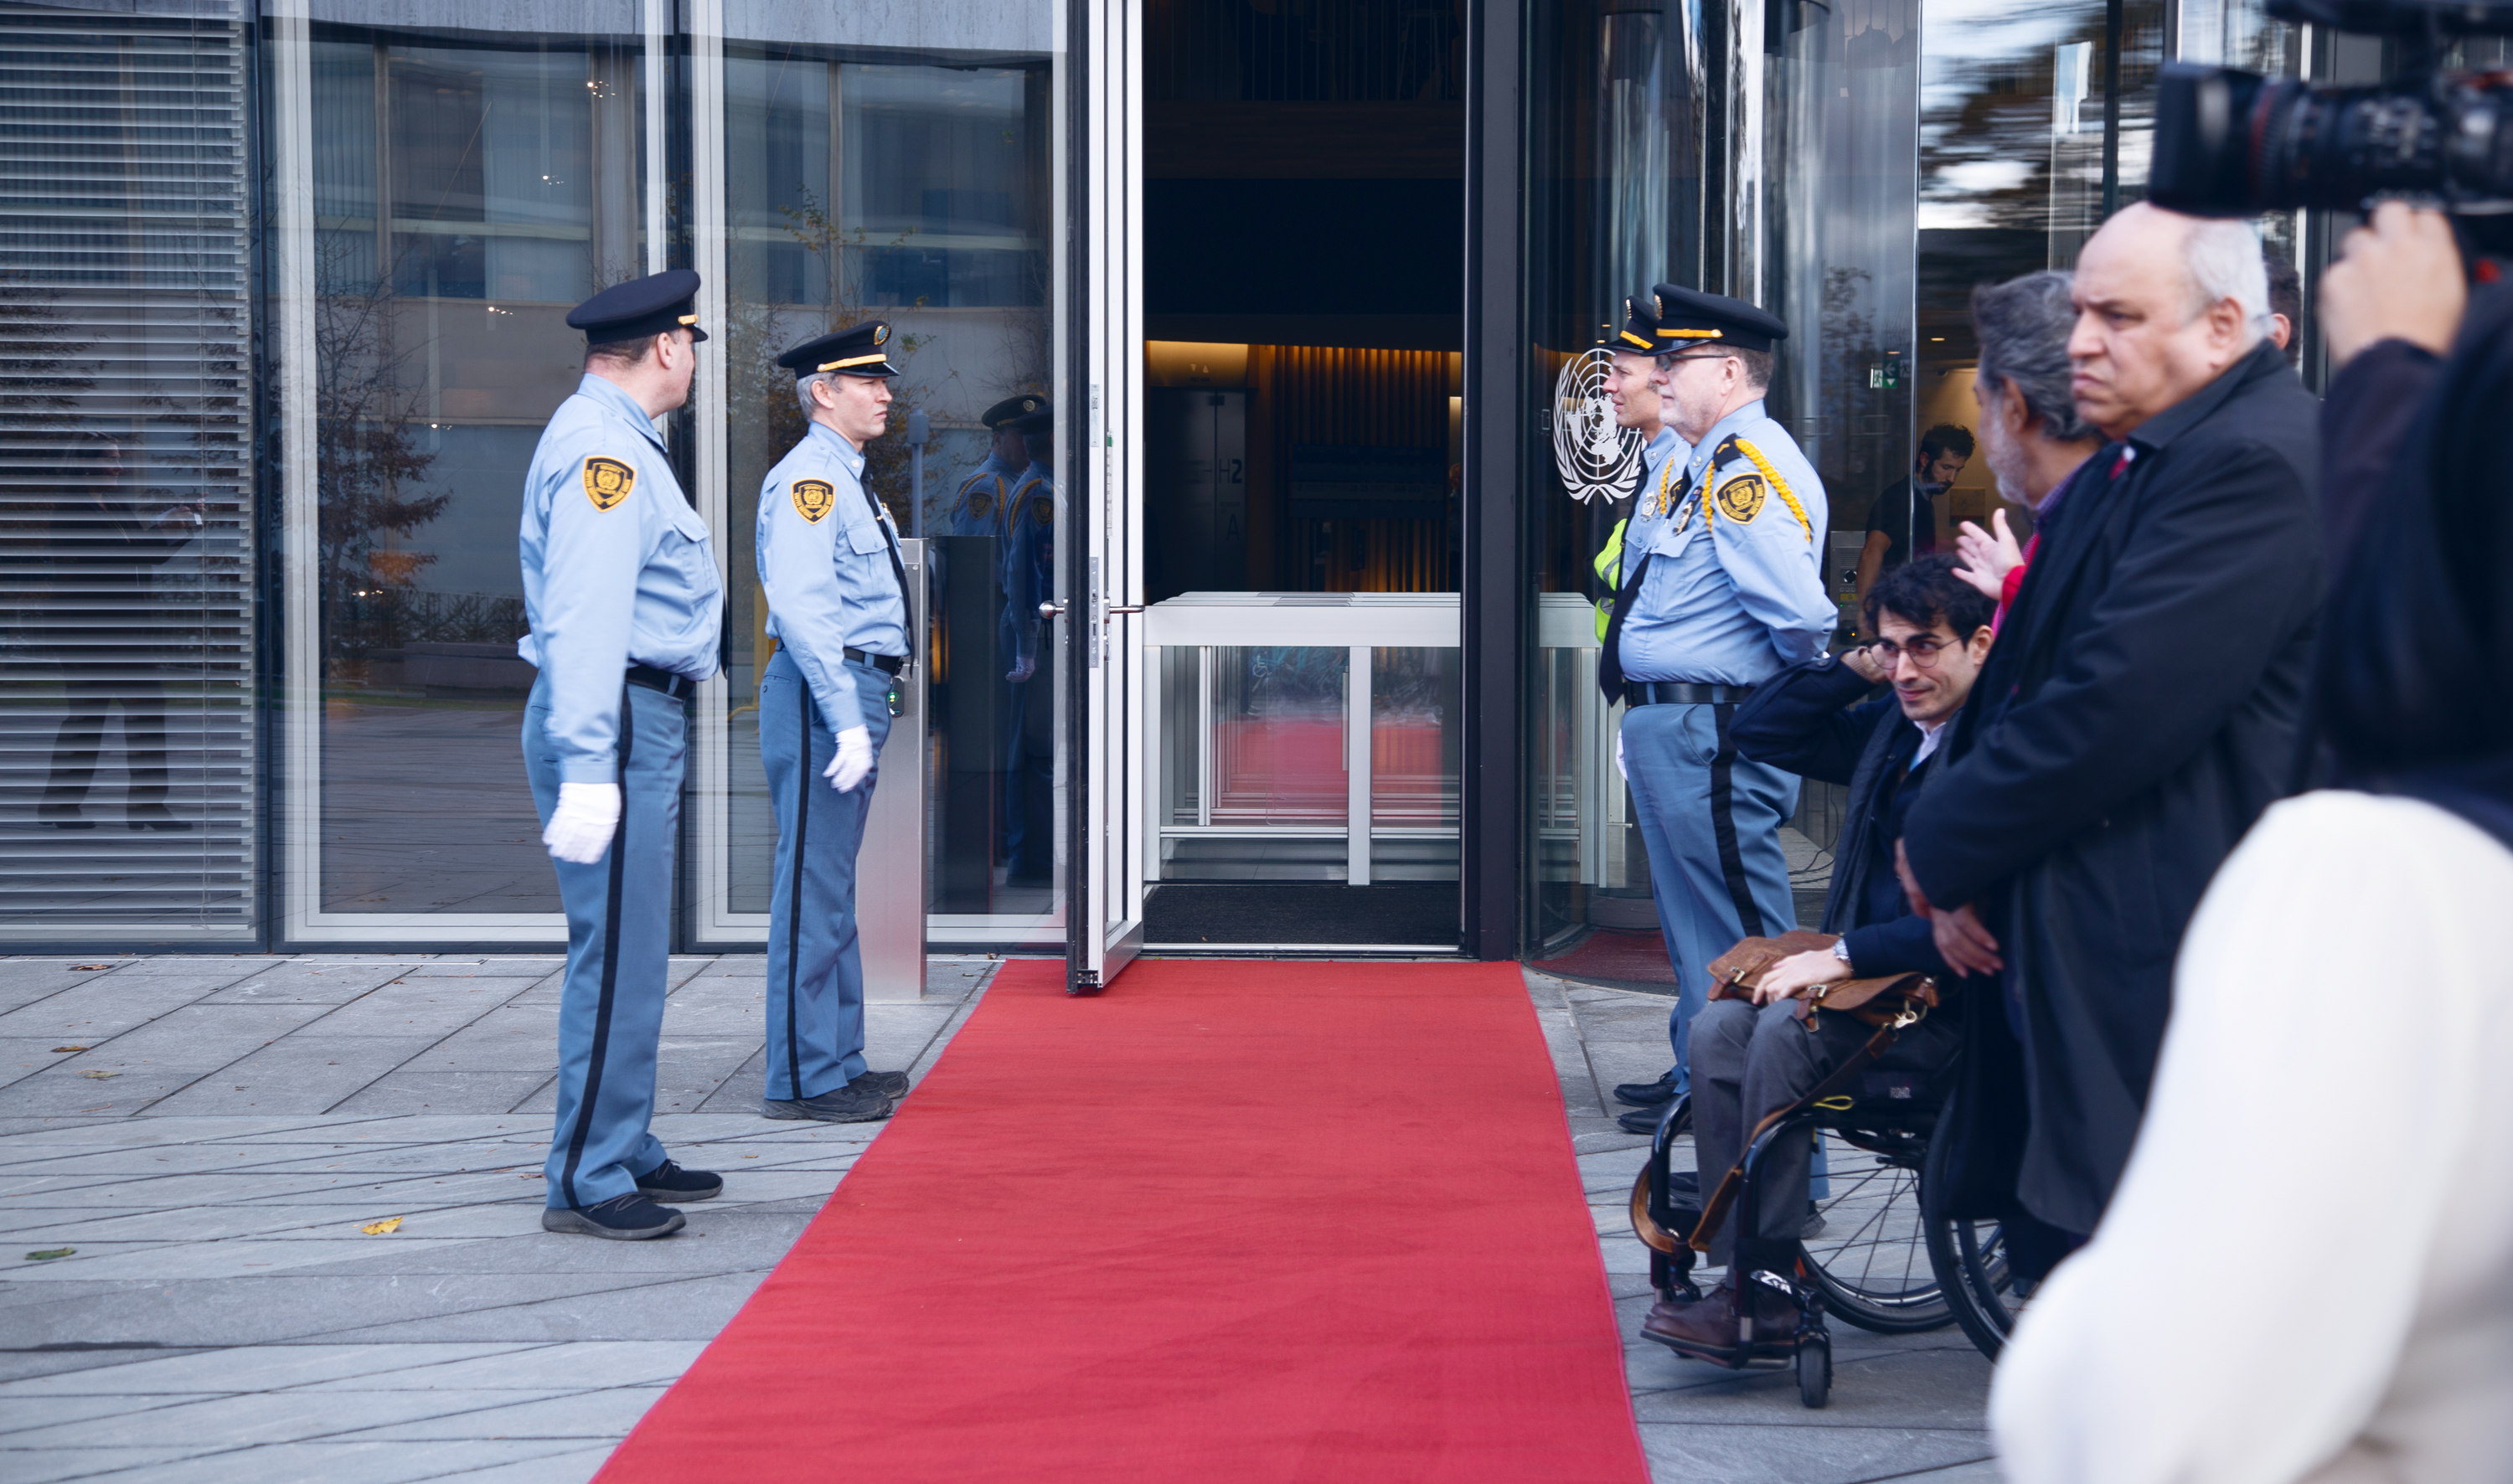 A red carpet is laid out in front of an open door to a glass building. Four Security and Safety Service officers stand on either side of the red carpet, two on either side. On the right, there is a small crowd of people and a television camera. 